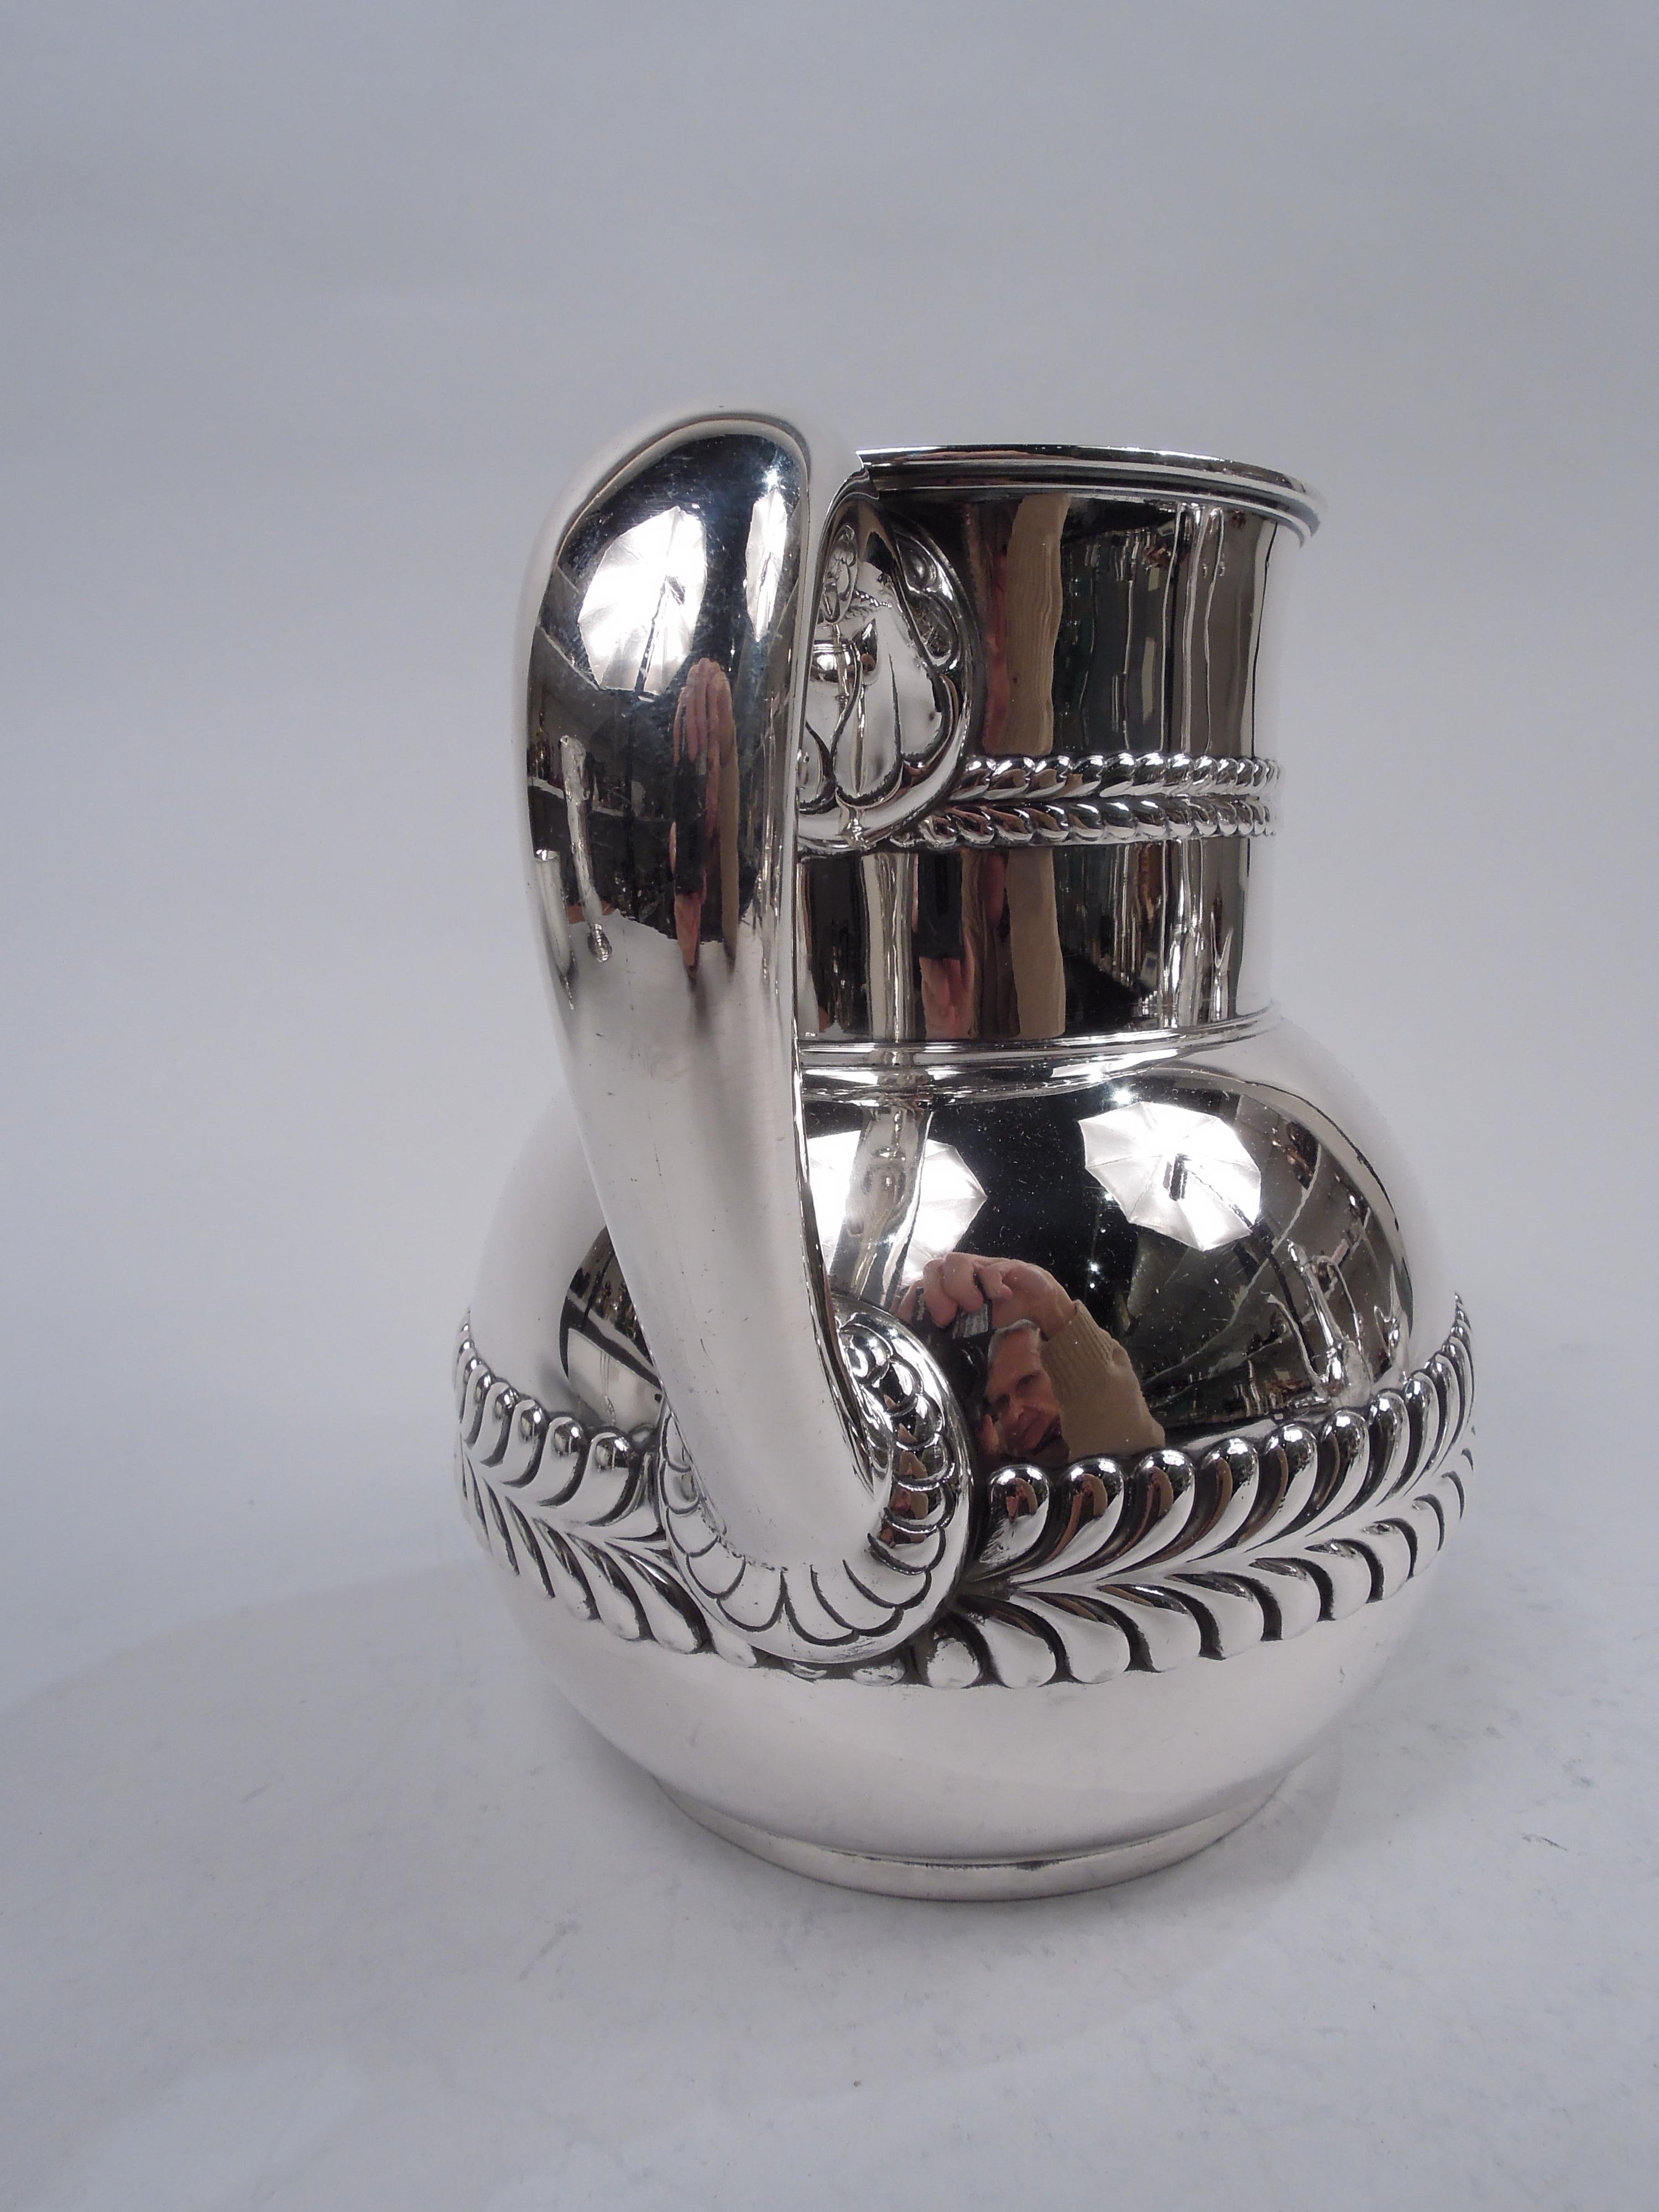 Victorian sterling silver water pitcher. Made by Tiffany & Co. in New York. Globular bowl and drum-form neck with small lip spout; c-scroll handle with stylized flower-head mounts. Bowl has embossed border of imbricated leaves or chevrons, a bold